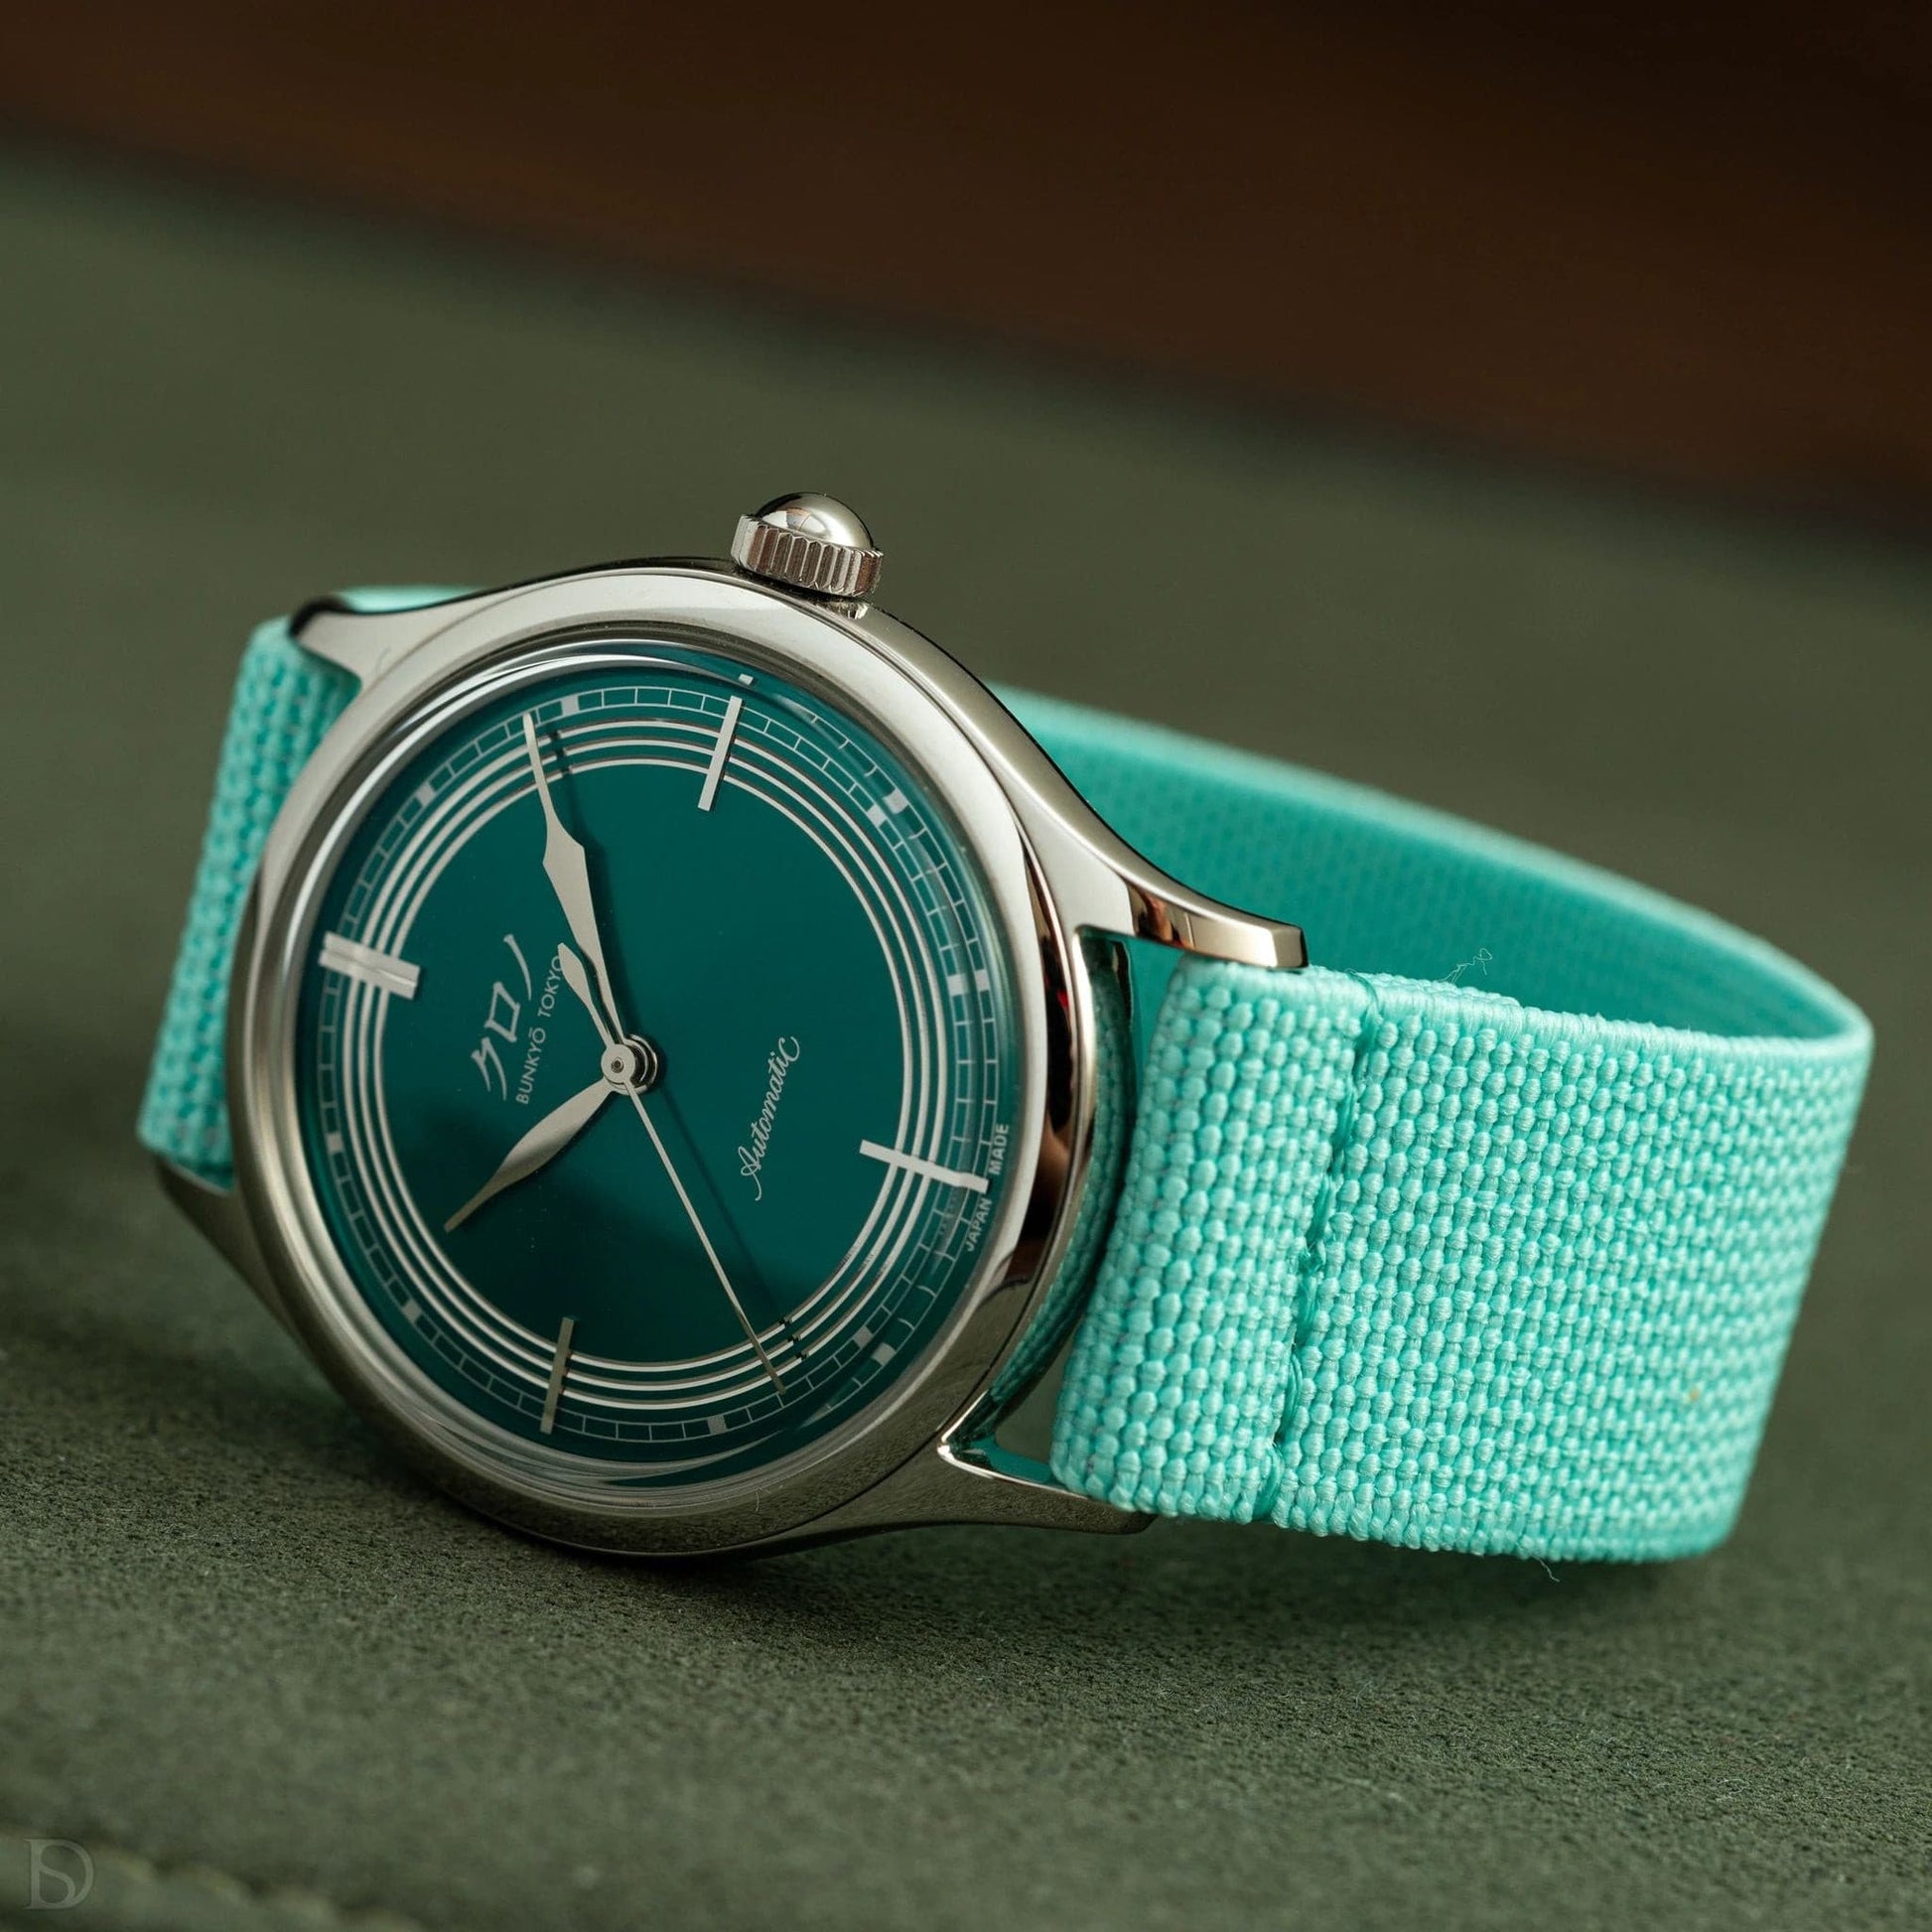 Elastic Loop Tiffany Blue by  Delugs Straps |  Time Keeper.